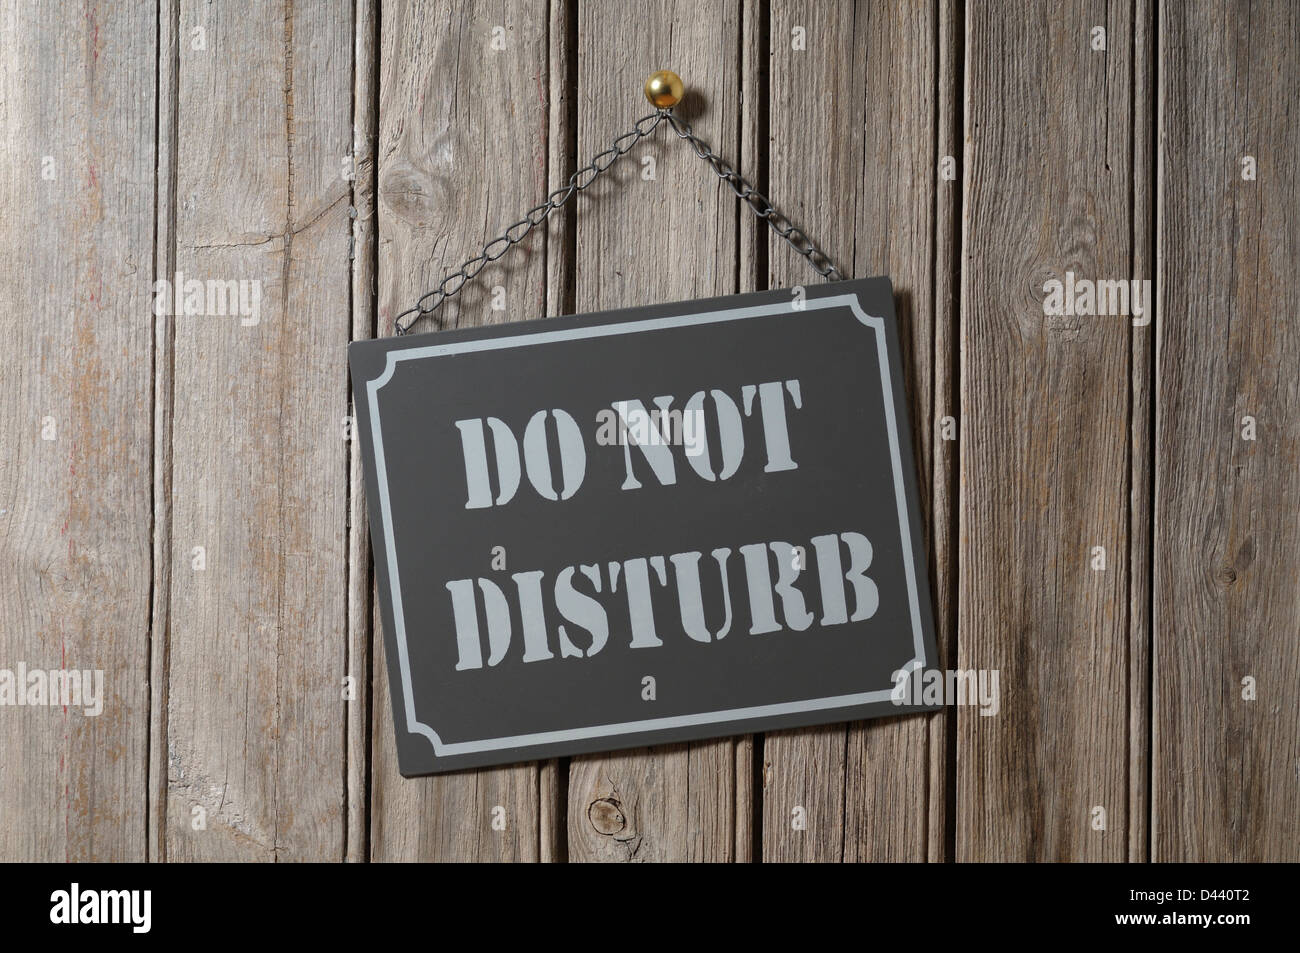 Do Not Disturb Sign Hanging on Wooden Wall Stock Photo